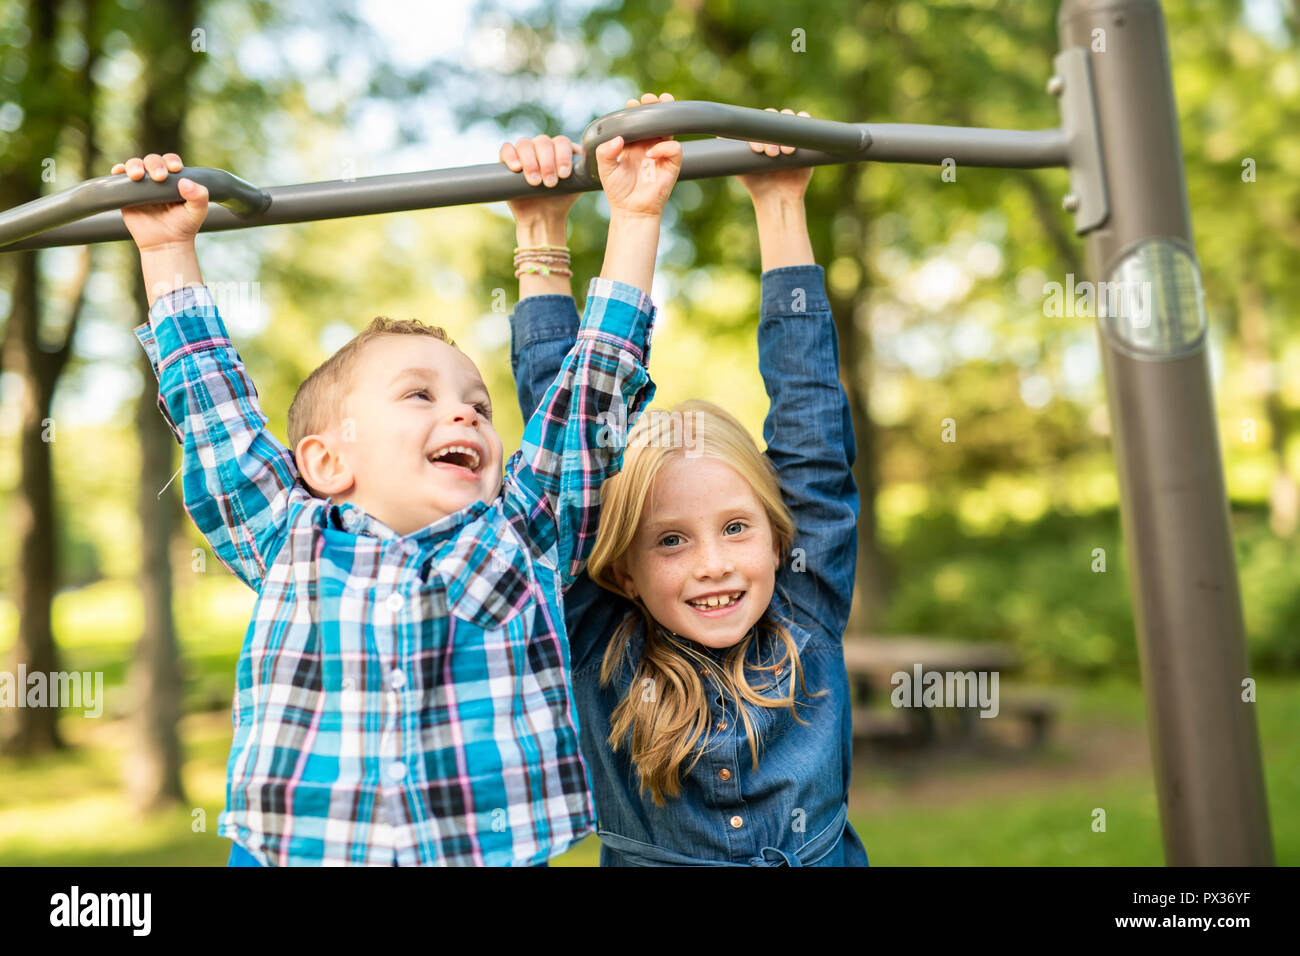 The Two young children having fun on the playground Stock Photo